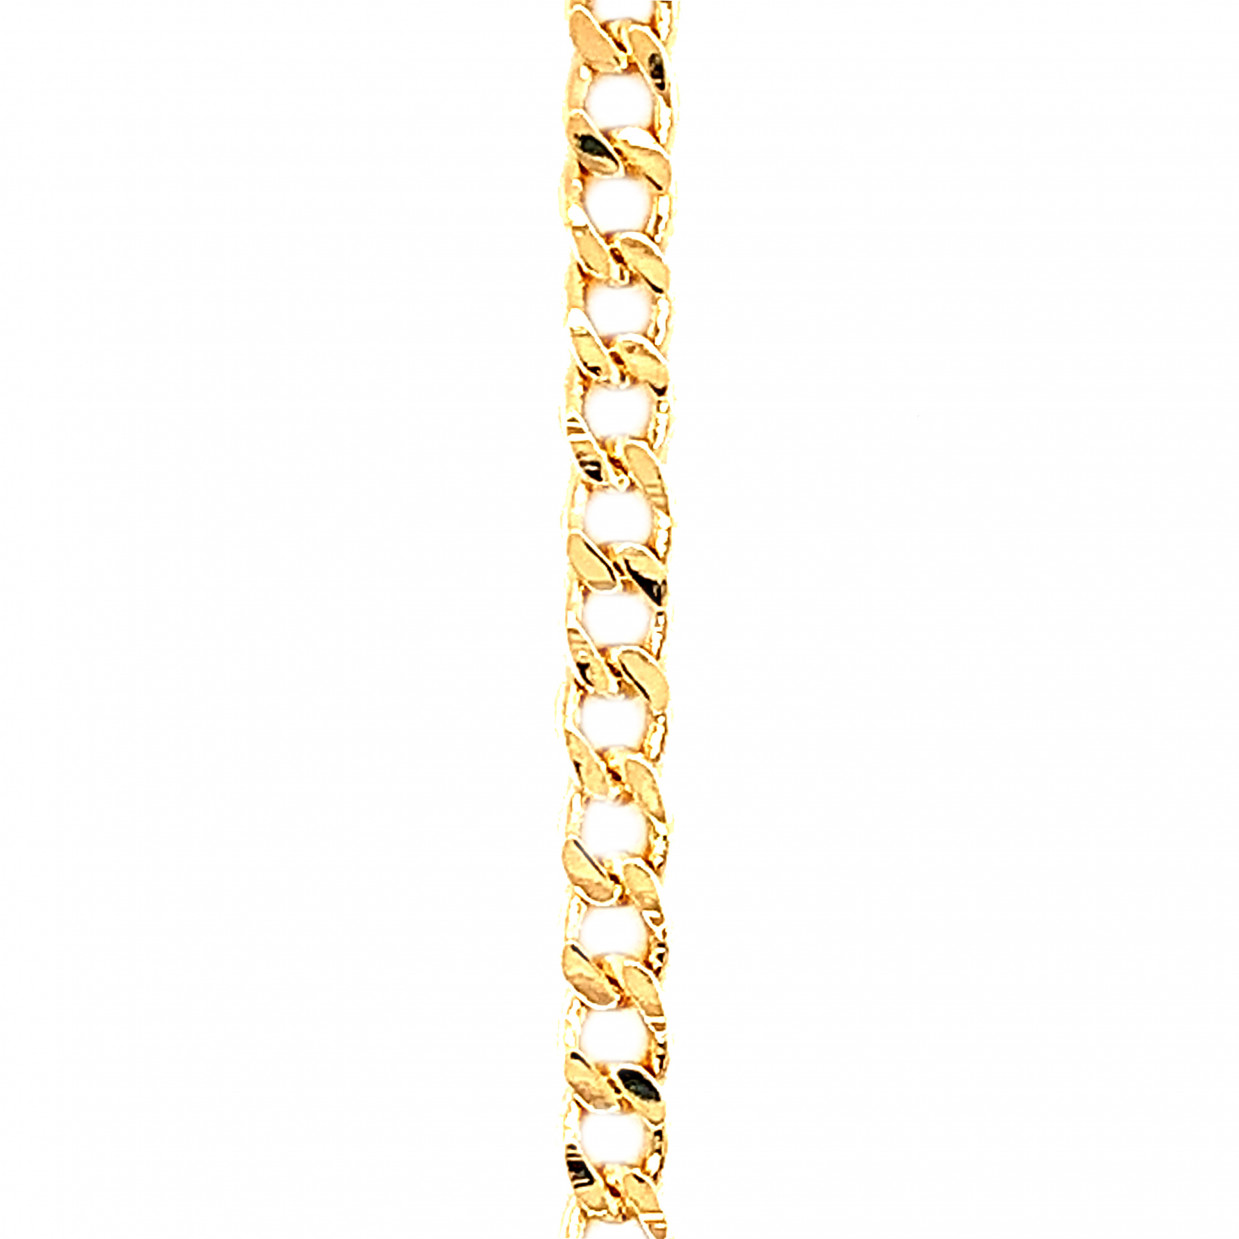 16" 3.5mm Curb Link Chain with 2" Extension - Gold Filled